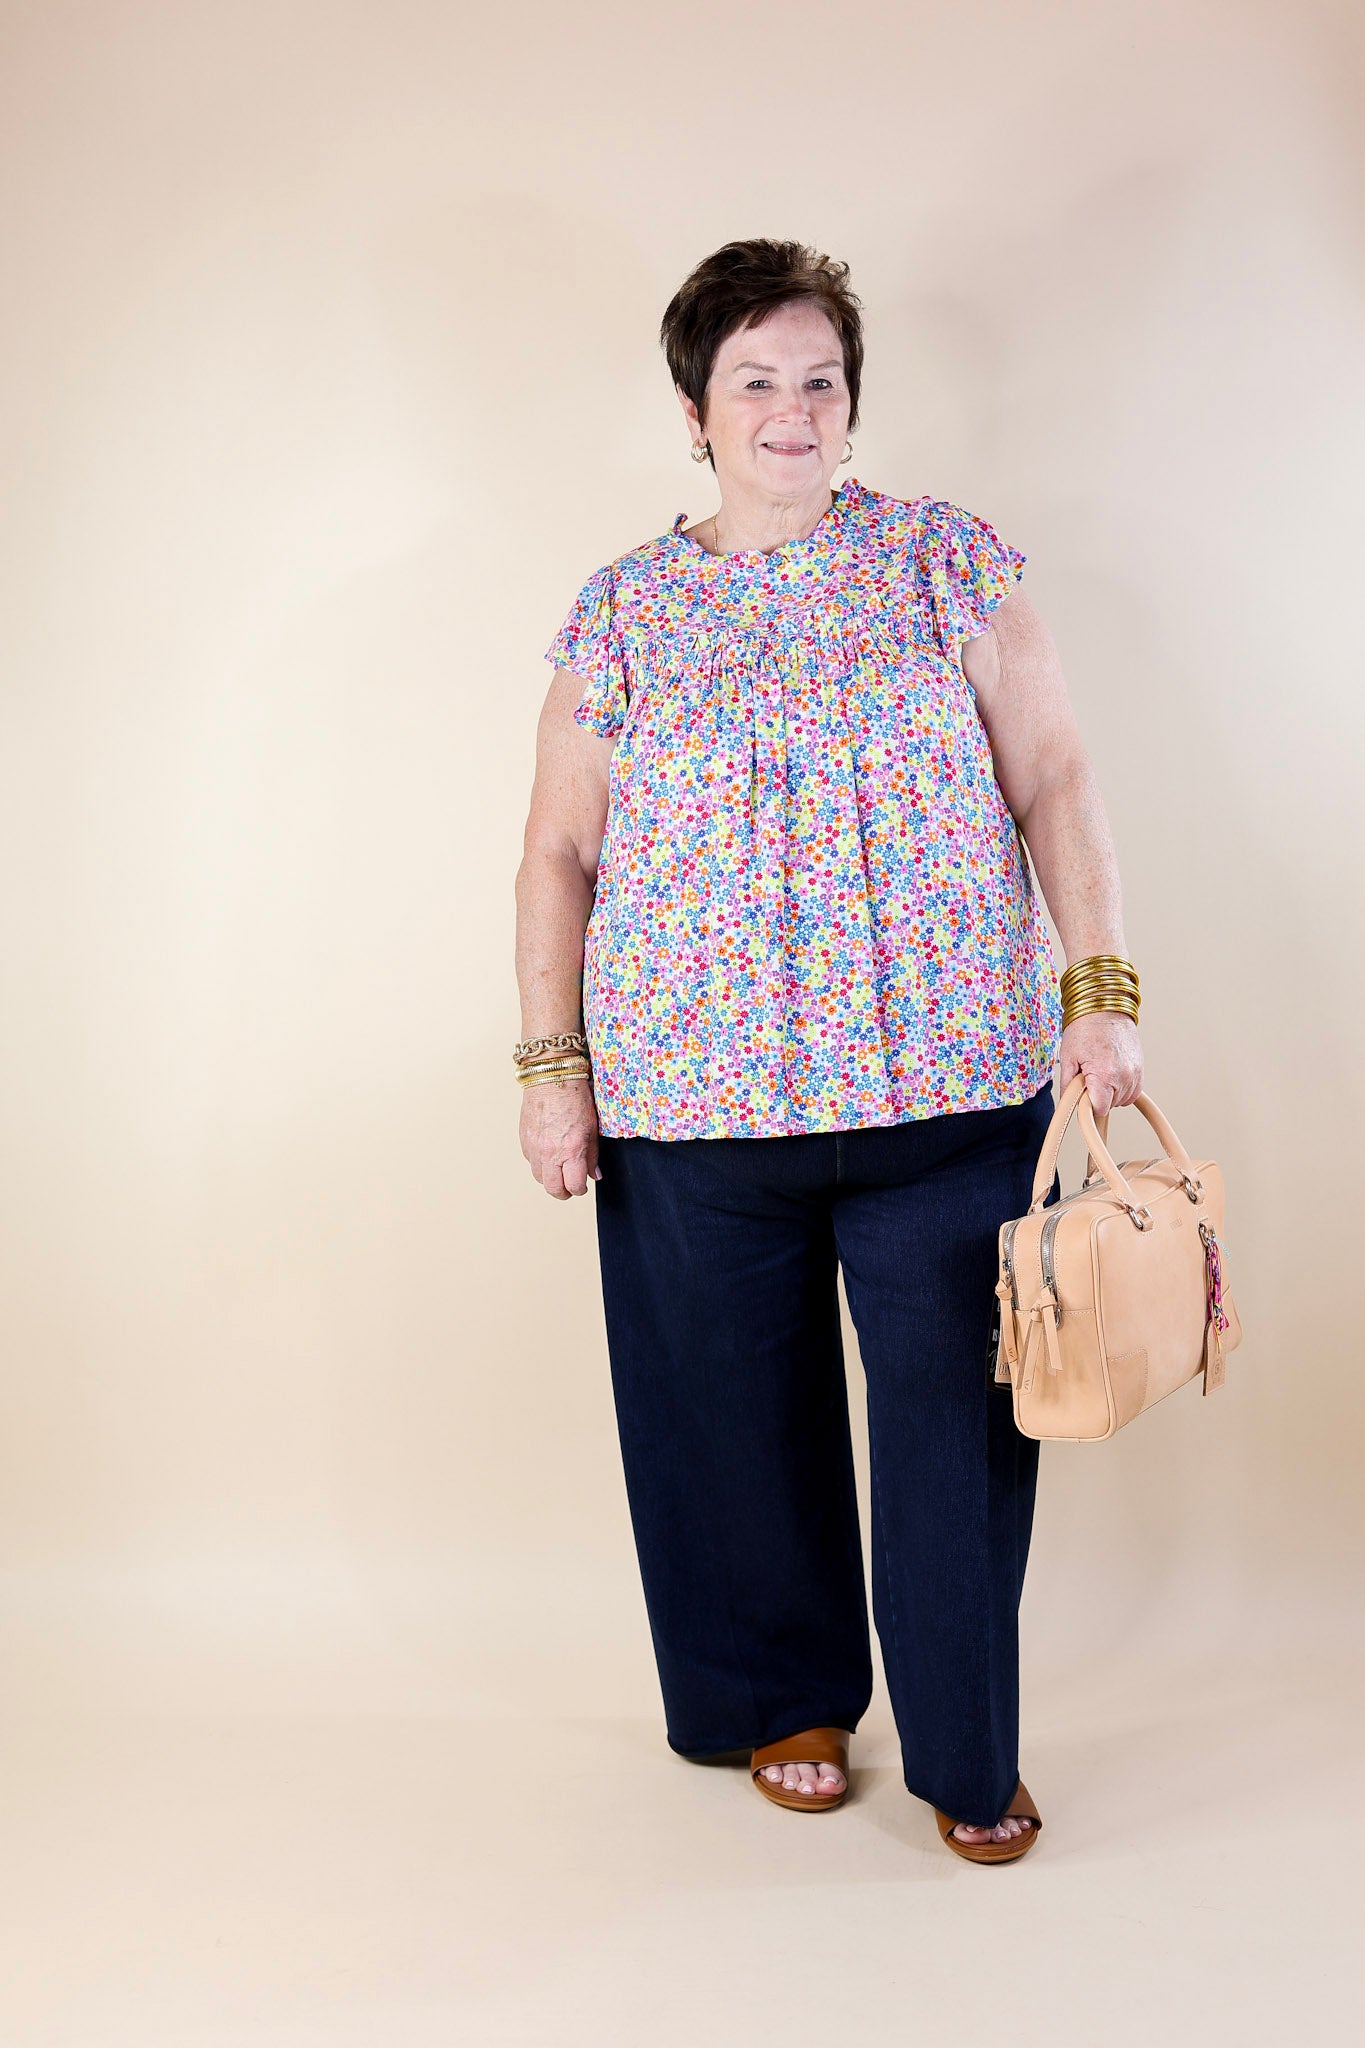 Fun Memories Floral Ruched Front Top with Ruffle Cap Sleeves in Blue Mix - Giddy Up Glamour Boutique